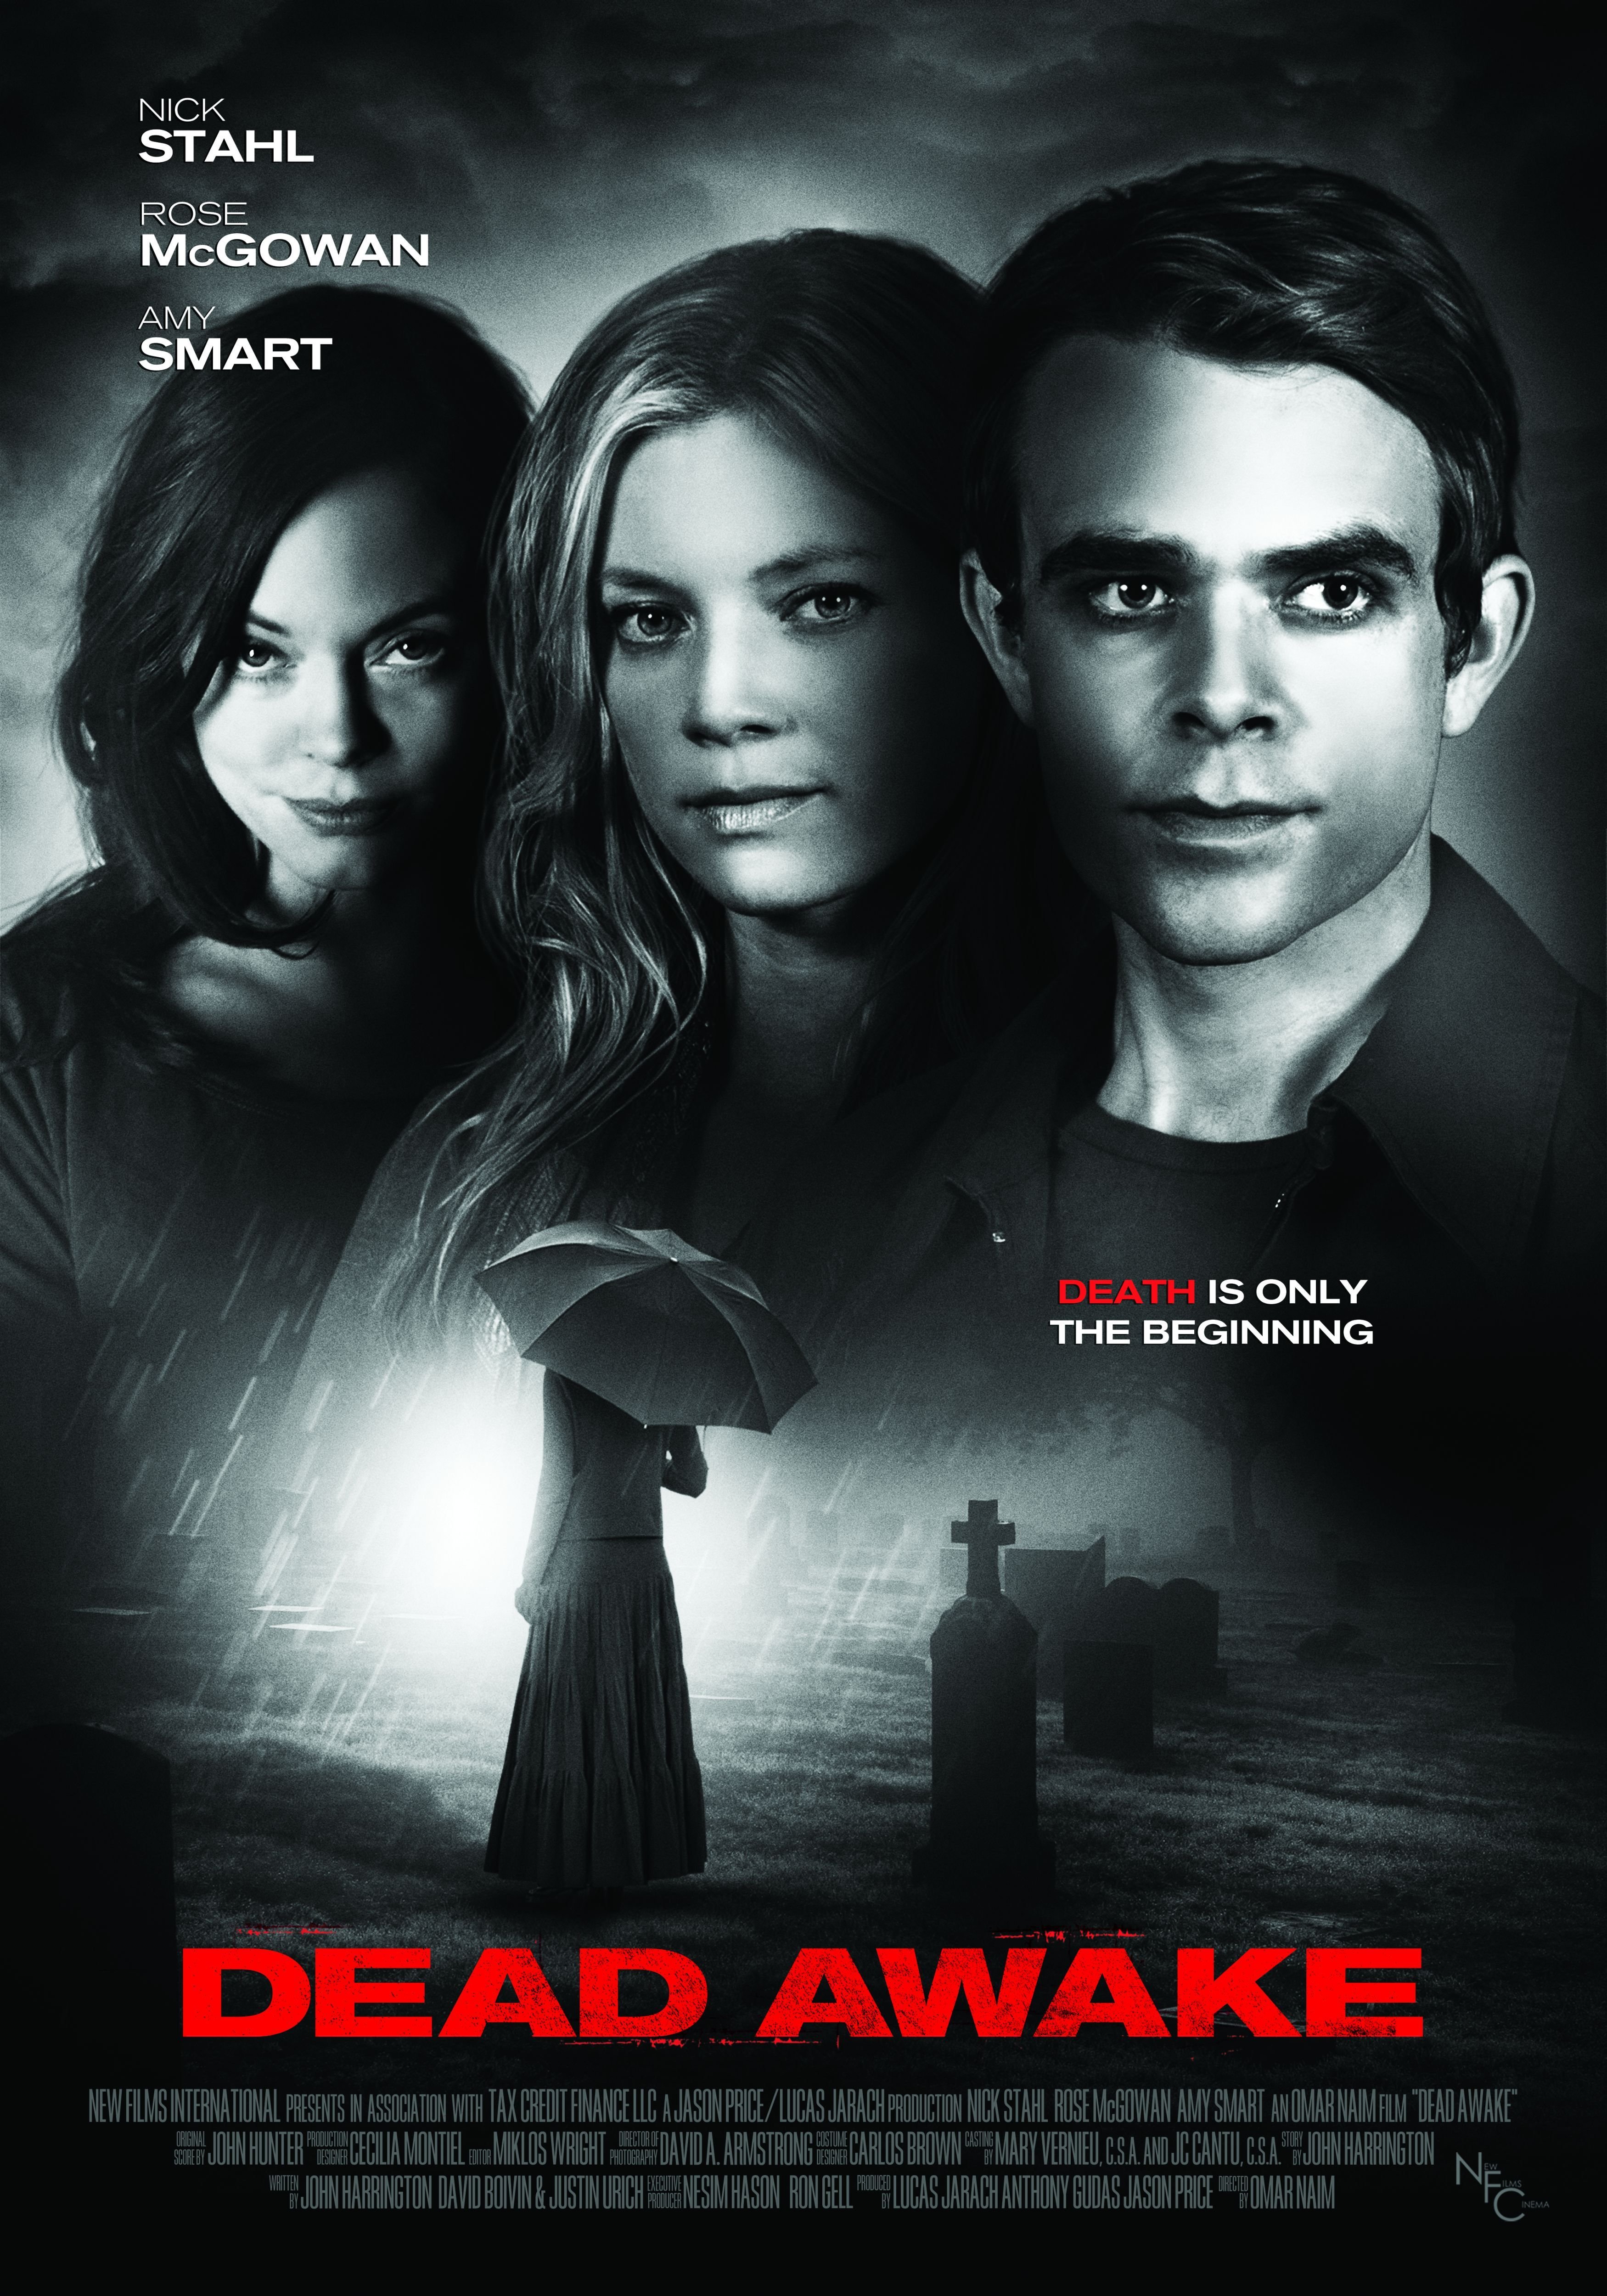 Rose McGowan, Nick Stahl and Amy Smart in Dead Awake (2010)